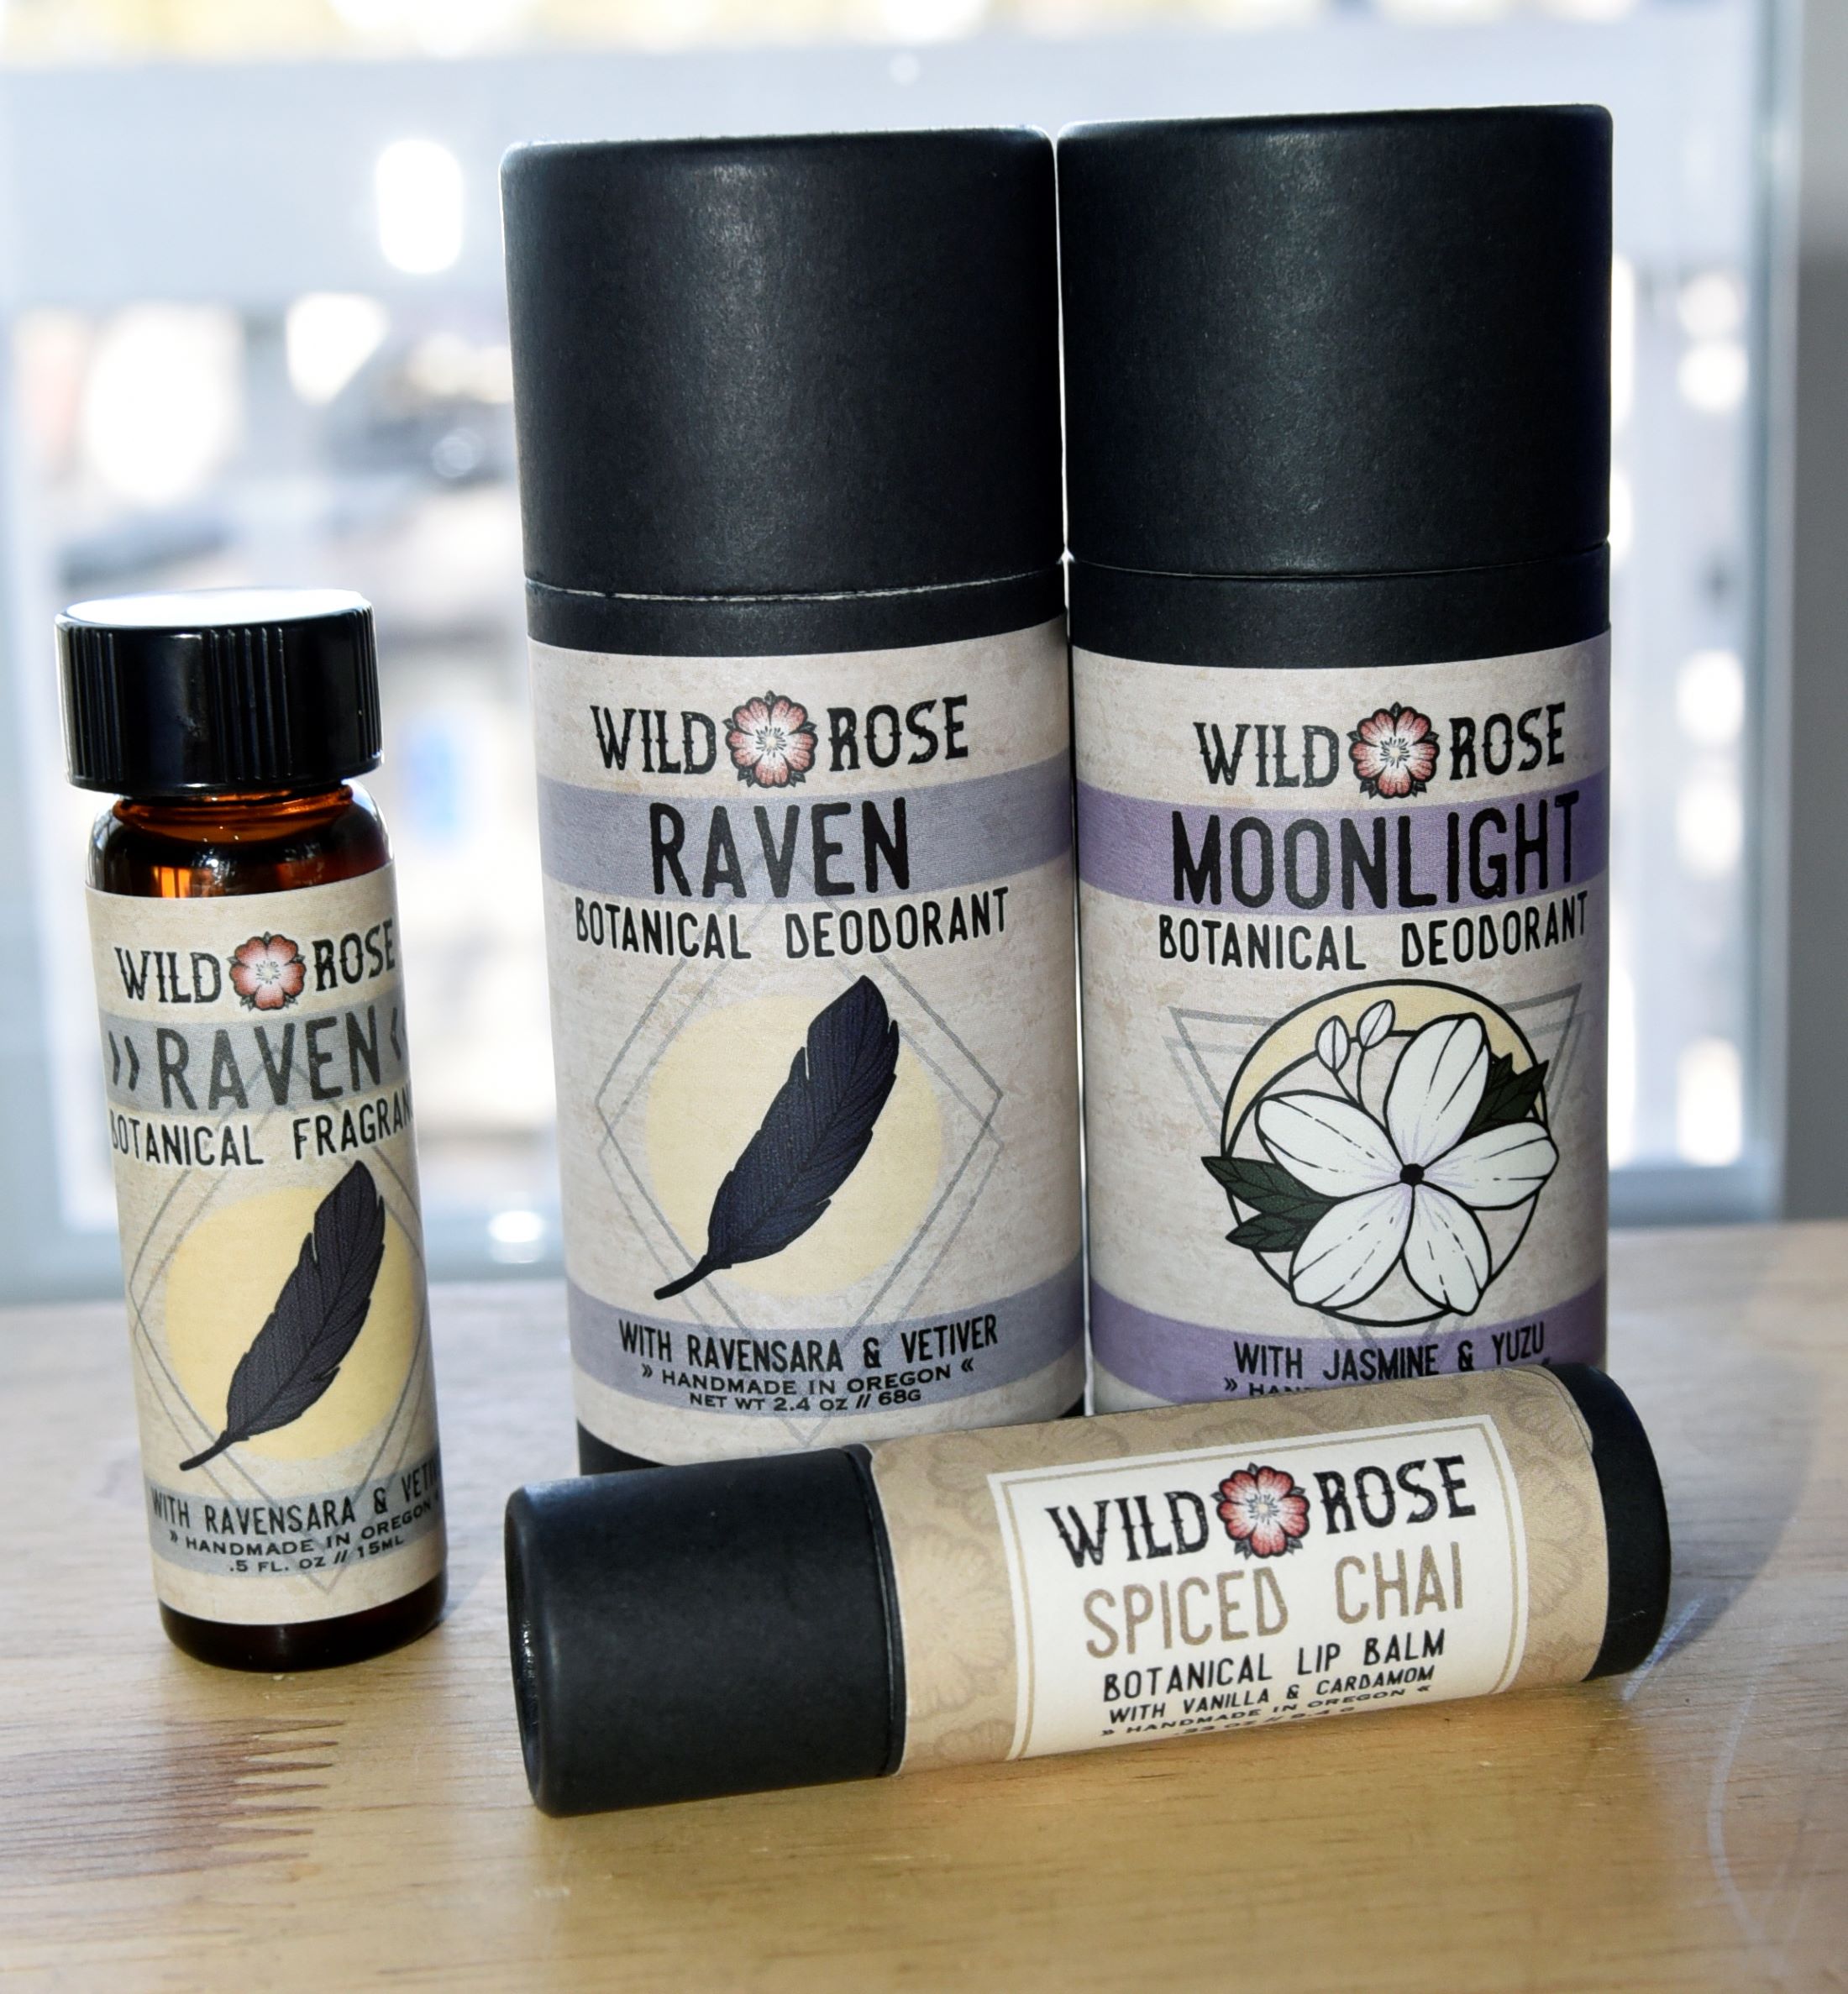 Wild Rose products, now available at the Chirp store.